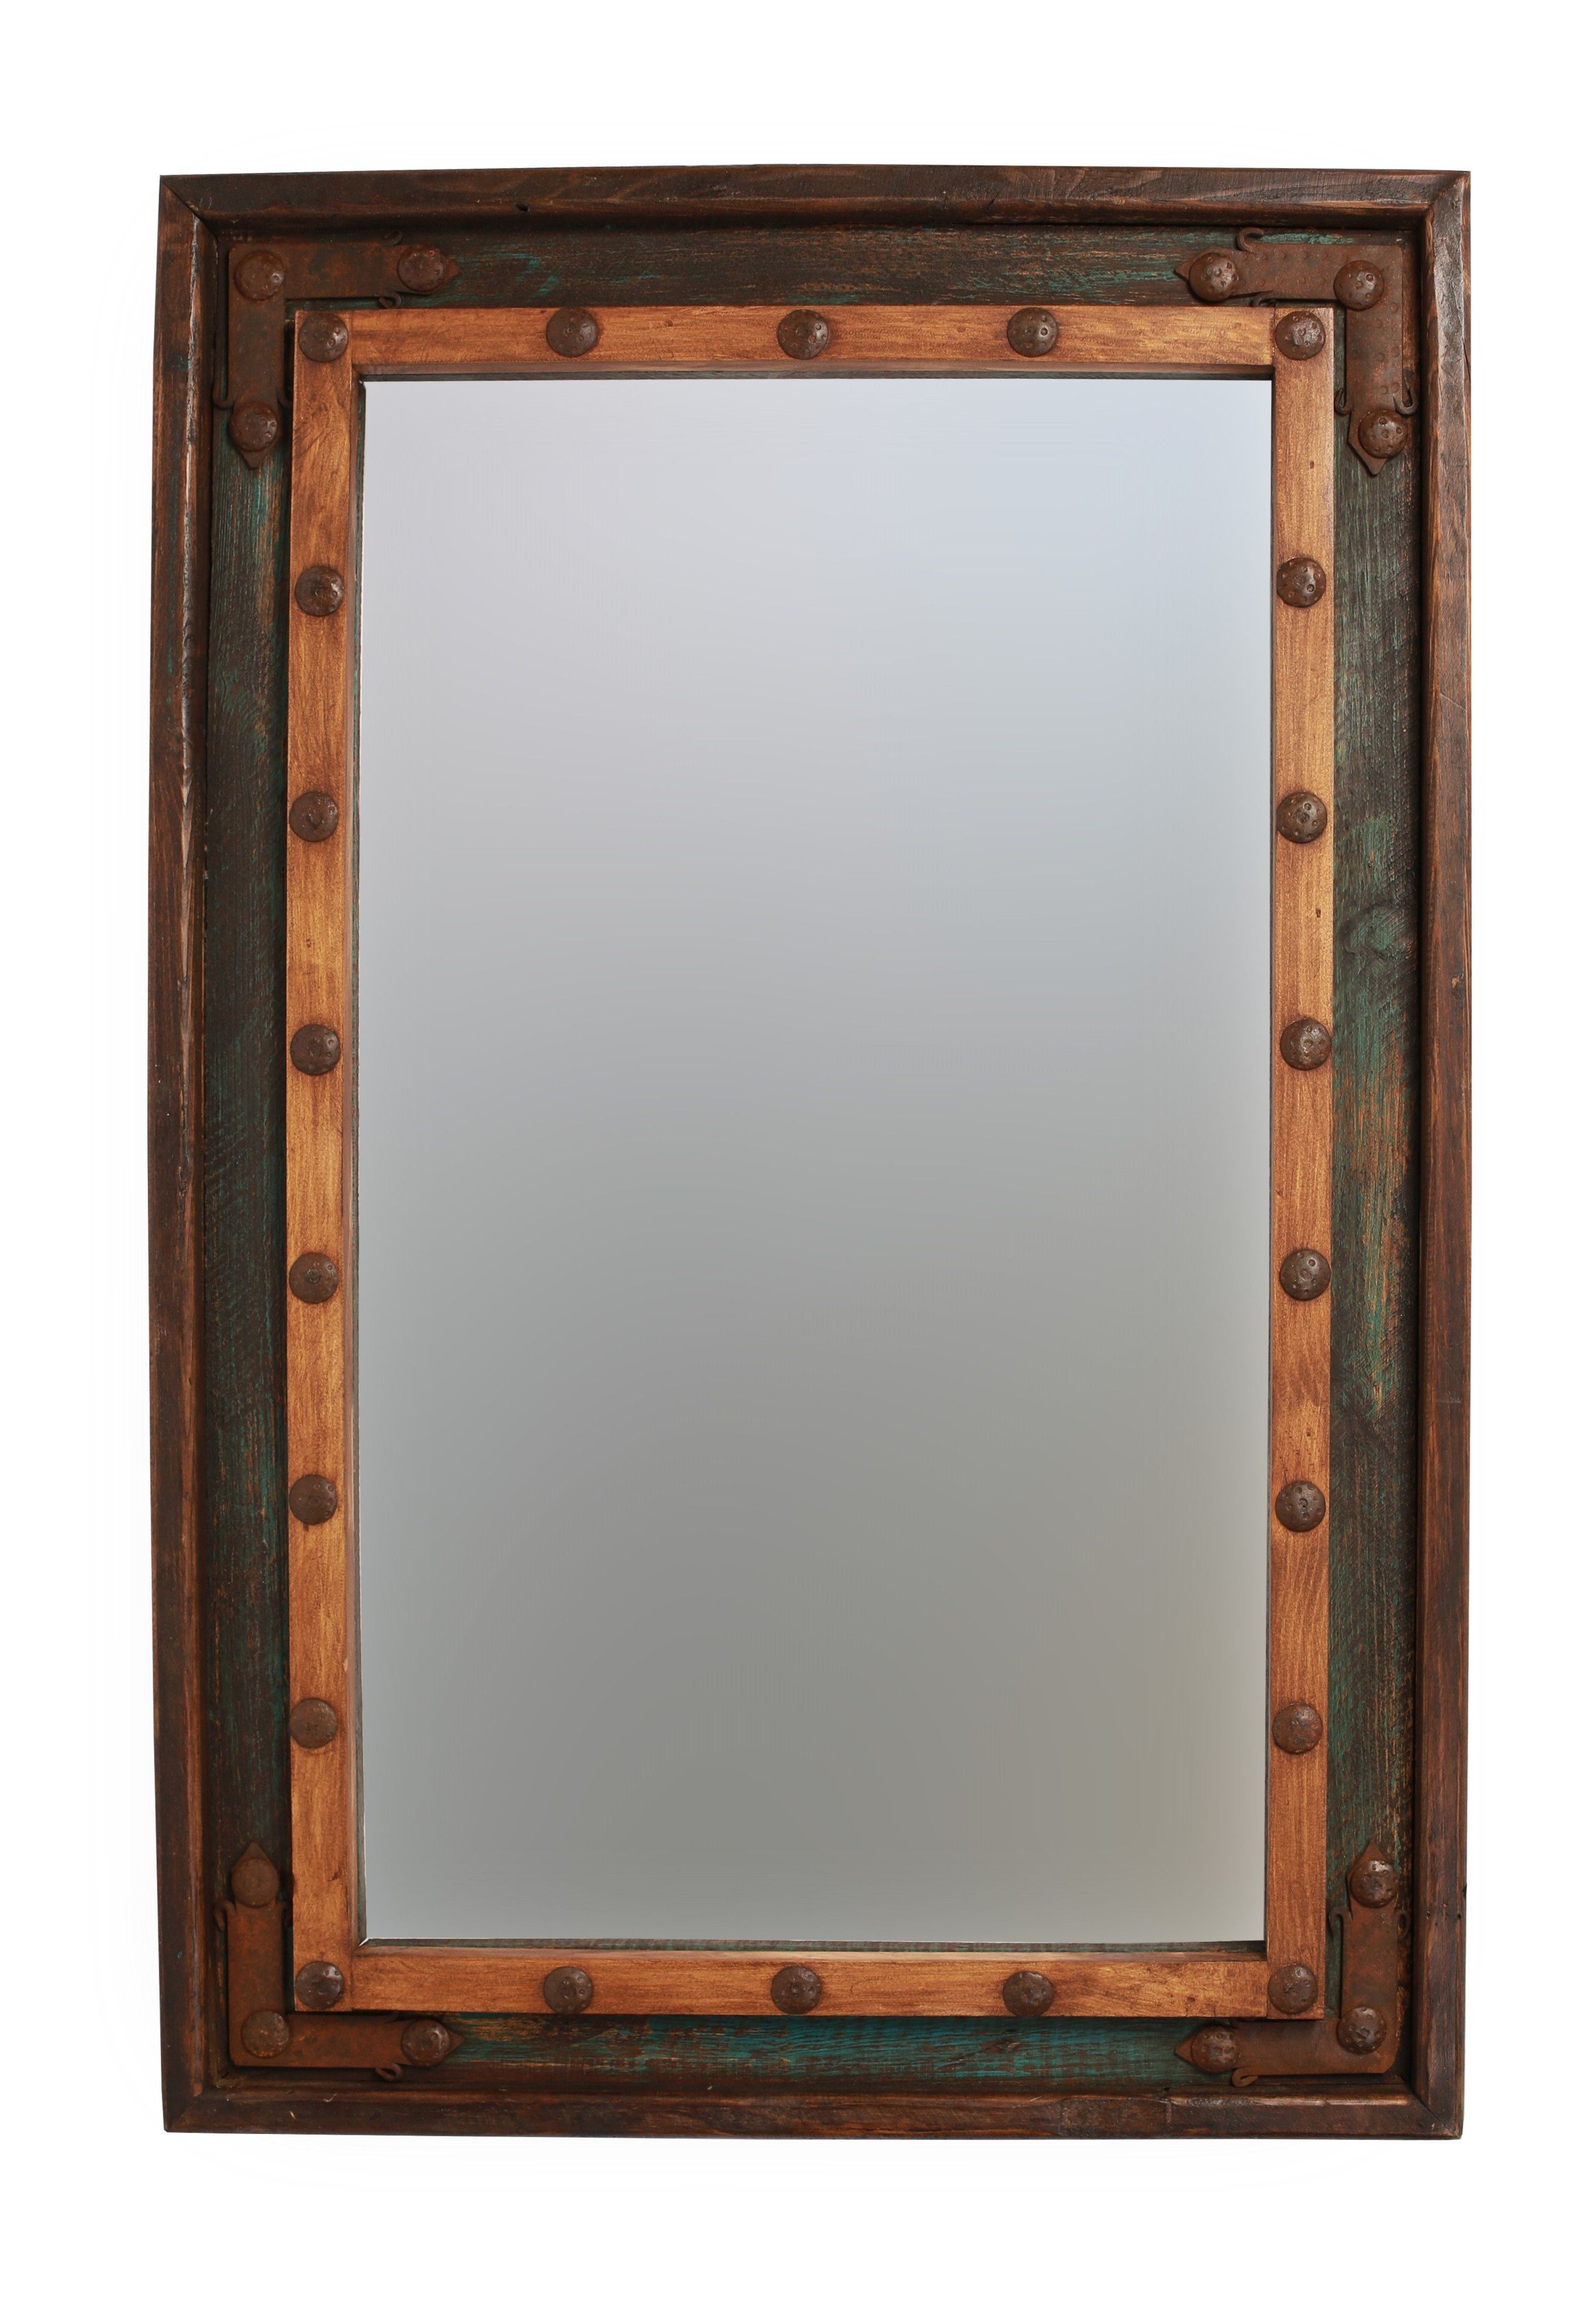 Well Known Lajoie Rustic Accent Mirrors For Farmhouse & Rustic Loon Peak Wall & Accent Mirrors (View 8 of 20)